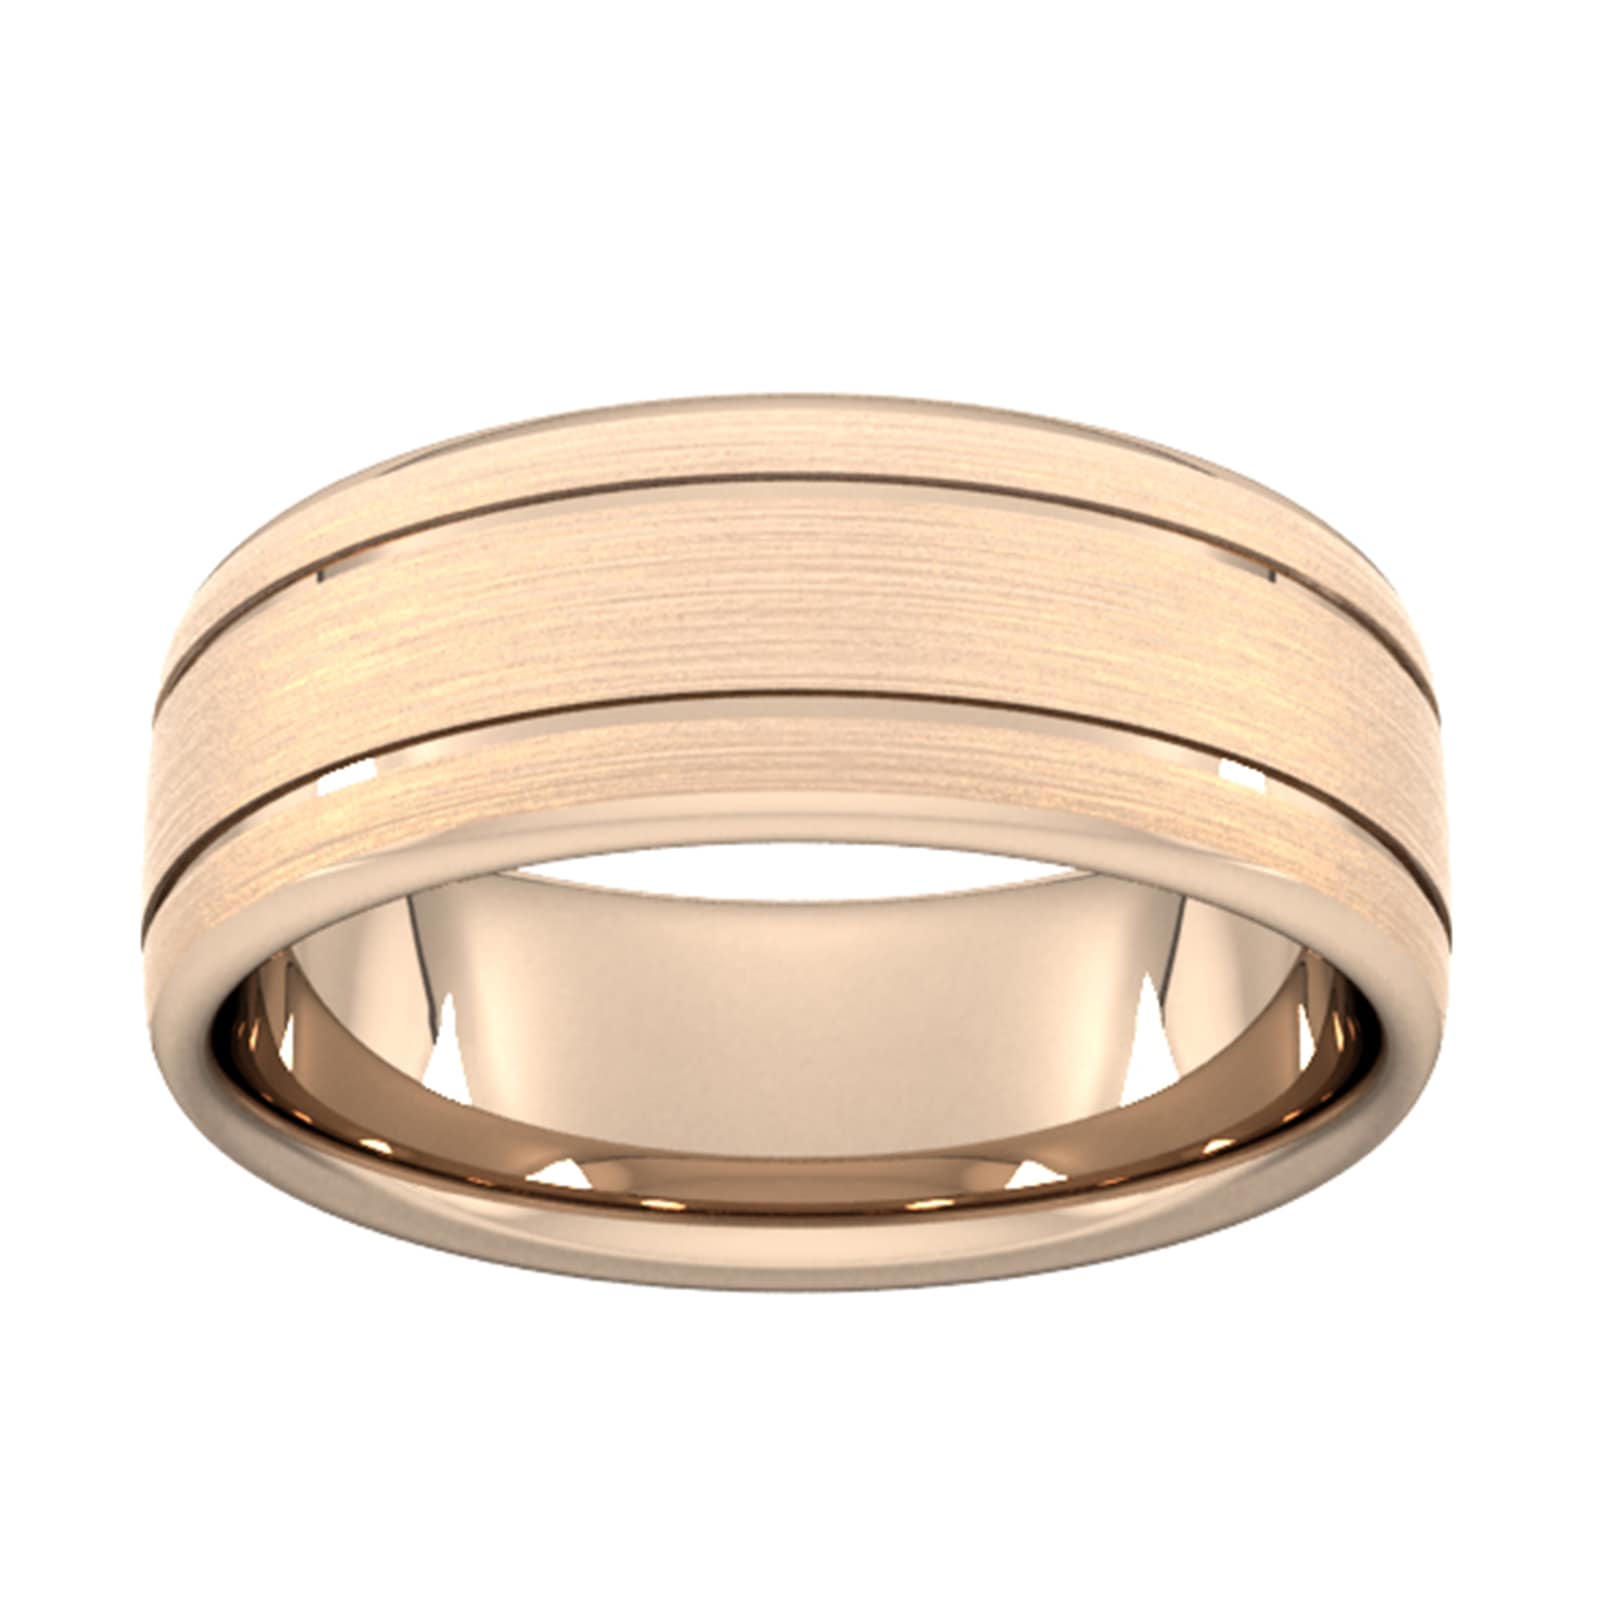 8mm Slight Court Extra Heavy Matt Finish With Double Grooves Wedding Ring In 18 Carat Rose Gold - Ring Size T